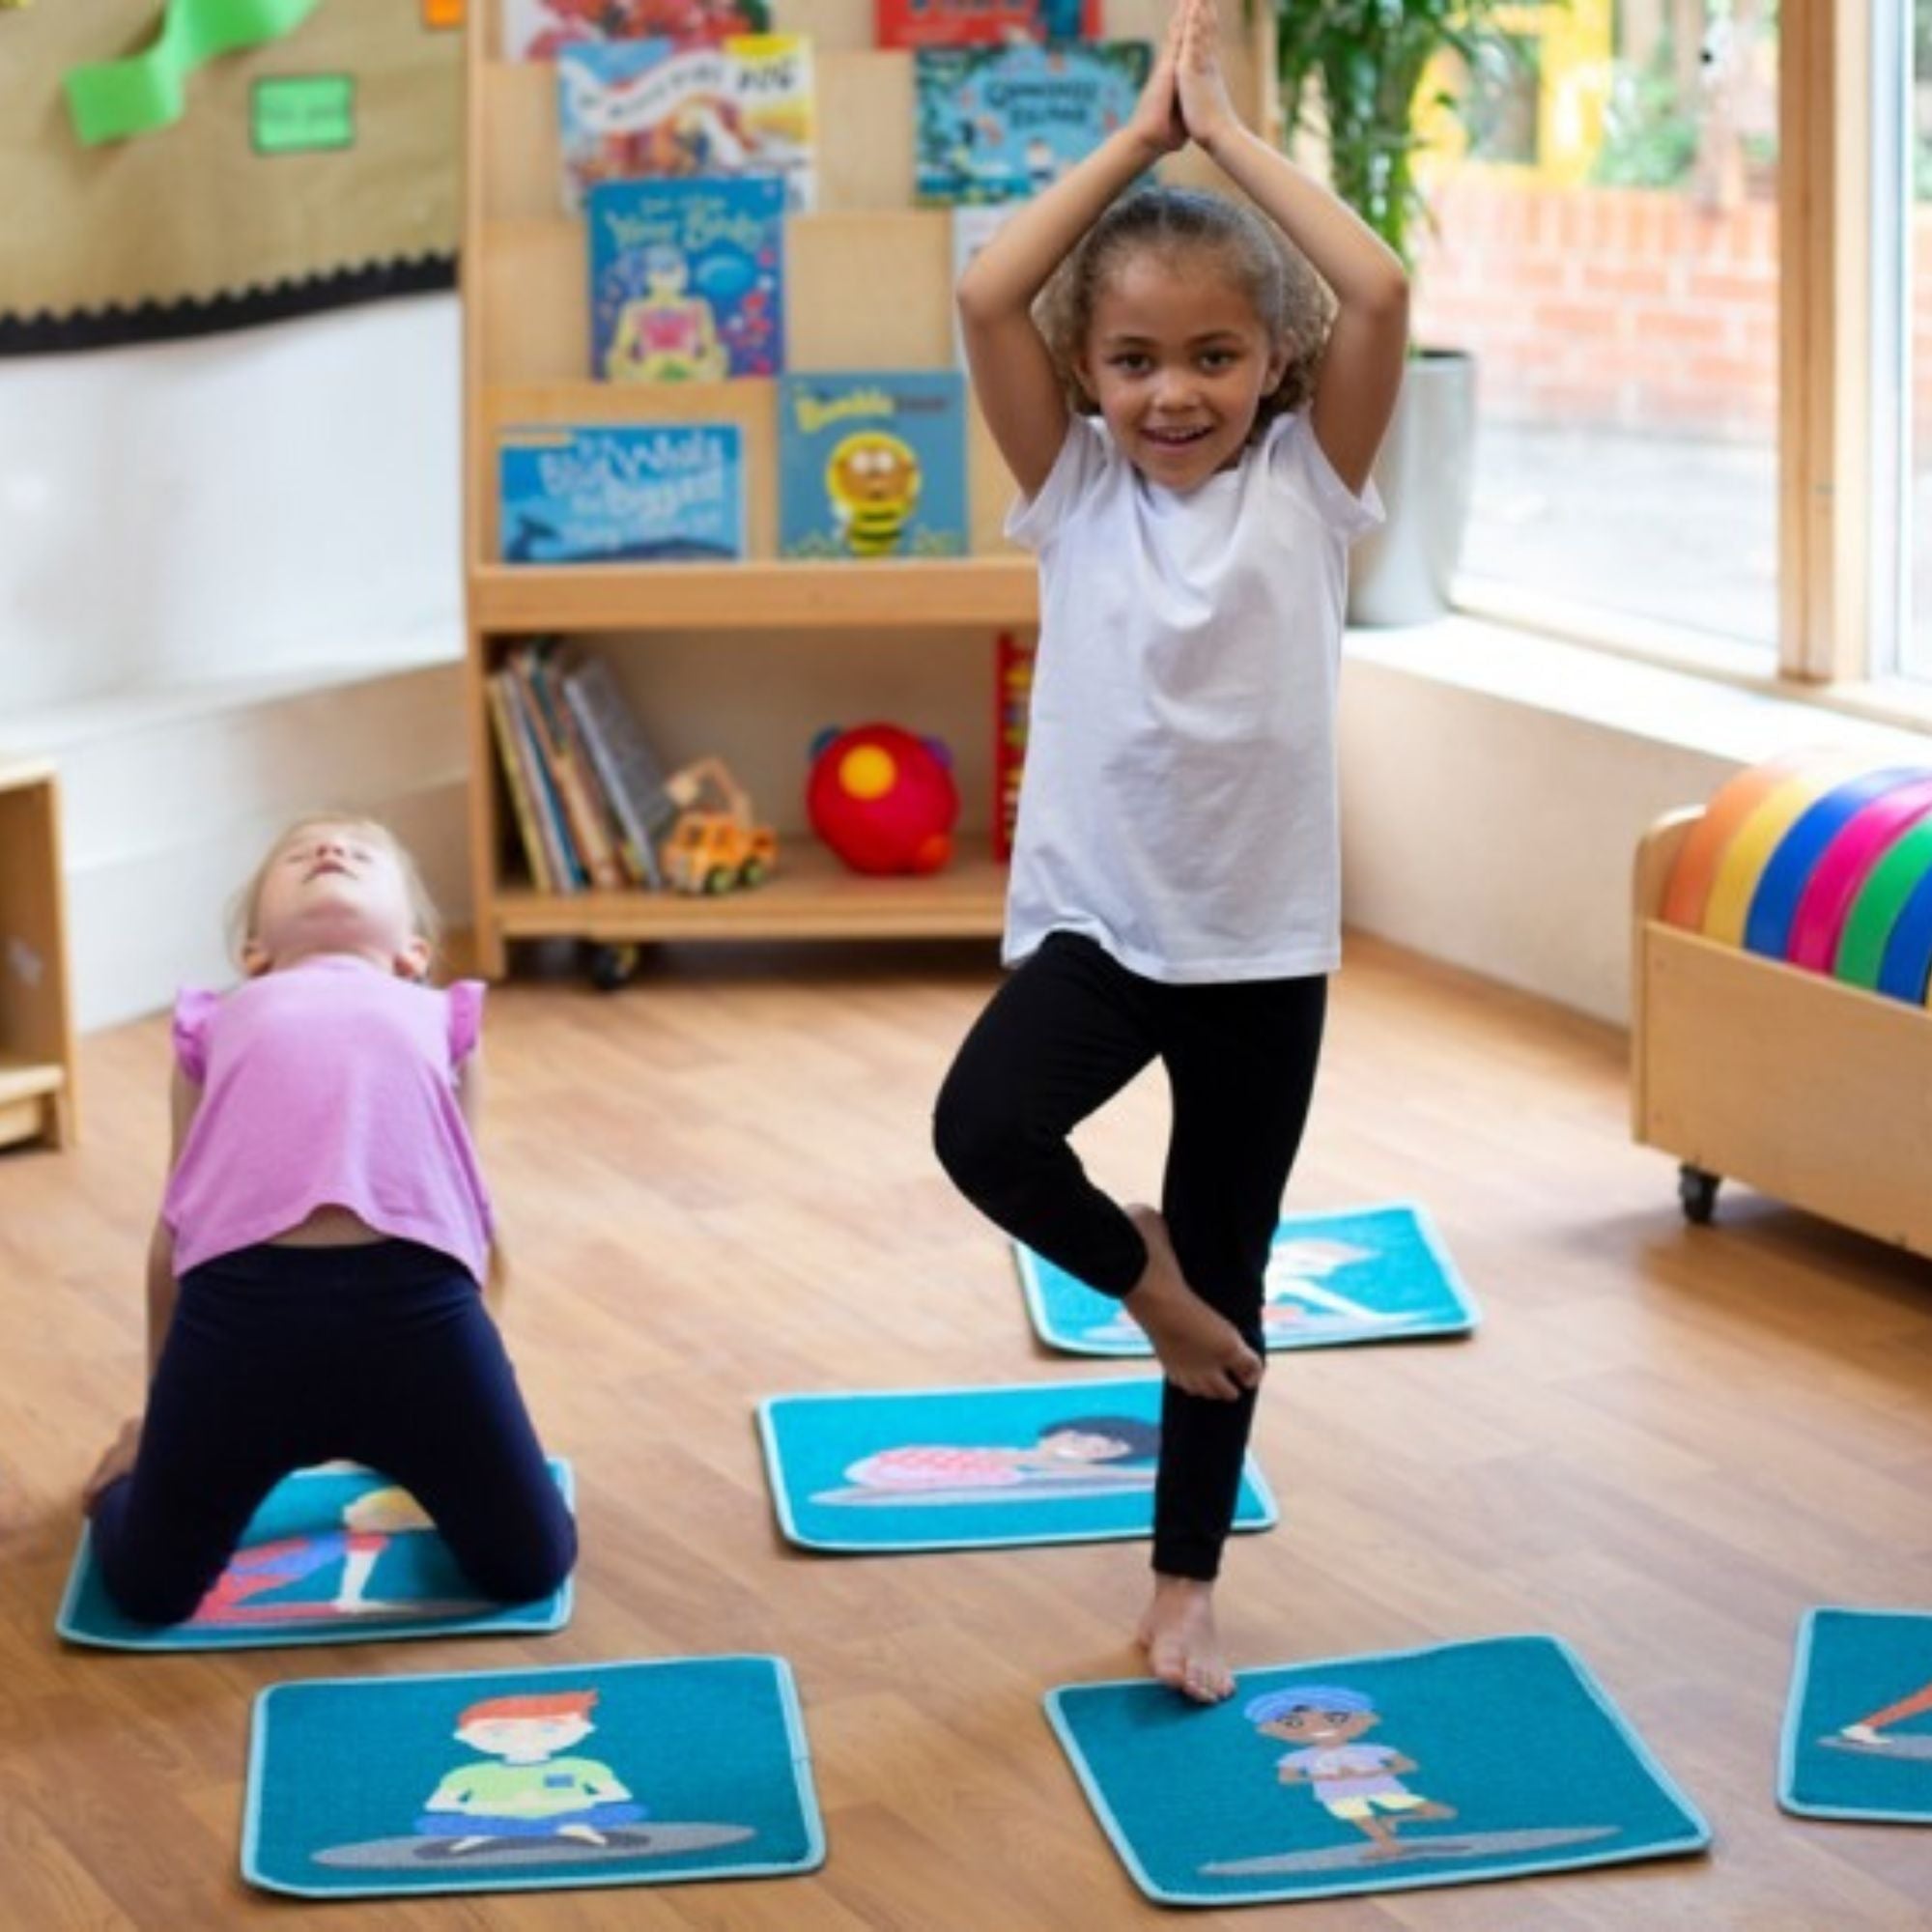 Yoga Position Indoor Outdoor Mini Placement Mats with Free Holdall, These Yoga position mini placement mats are Ideal for promoting children's well being and overall emotional health.Use the Yoga Position Indoor Outdoor Mini Placement Mats to get fit and active in a fun and engaging way whilst adding colour and style to any classroom.The Yoga Position Indoor Outdoor Mini Placement Mats come supplied with a free of charge holdall for easy storage and movement in between classes. Yoga and being mindful during